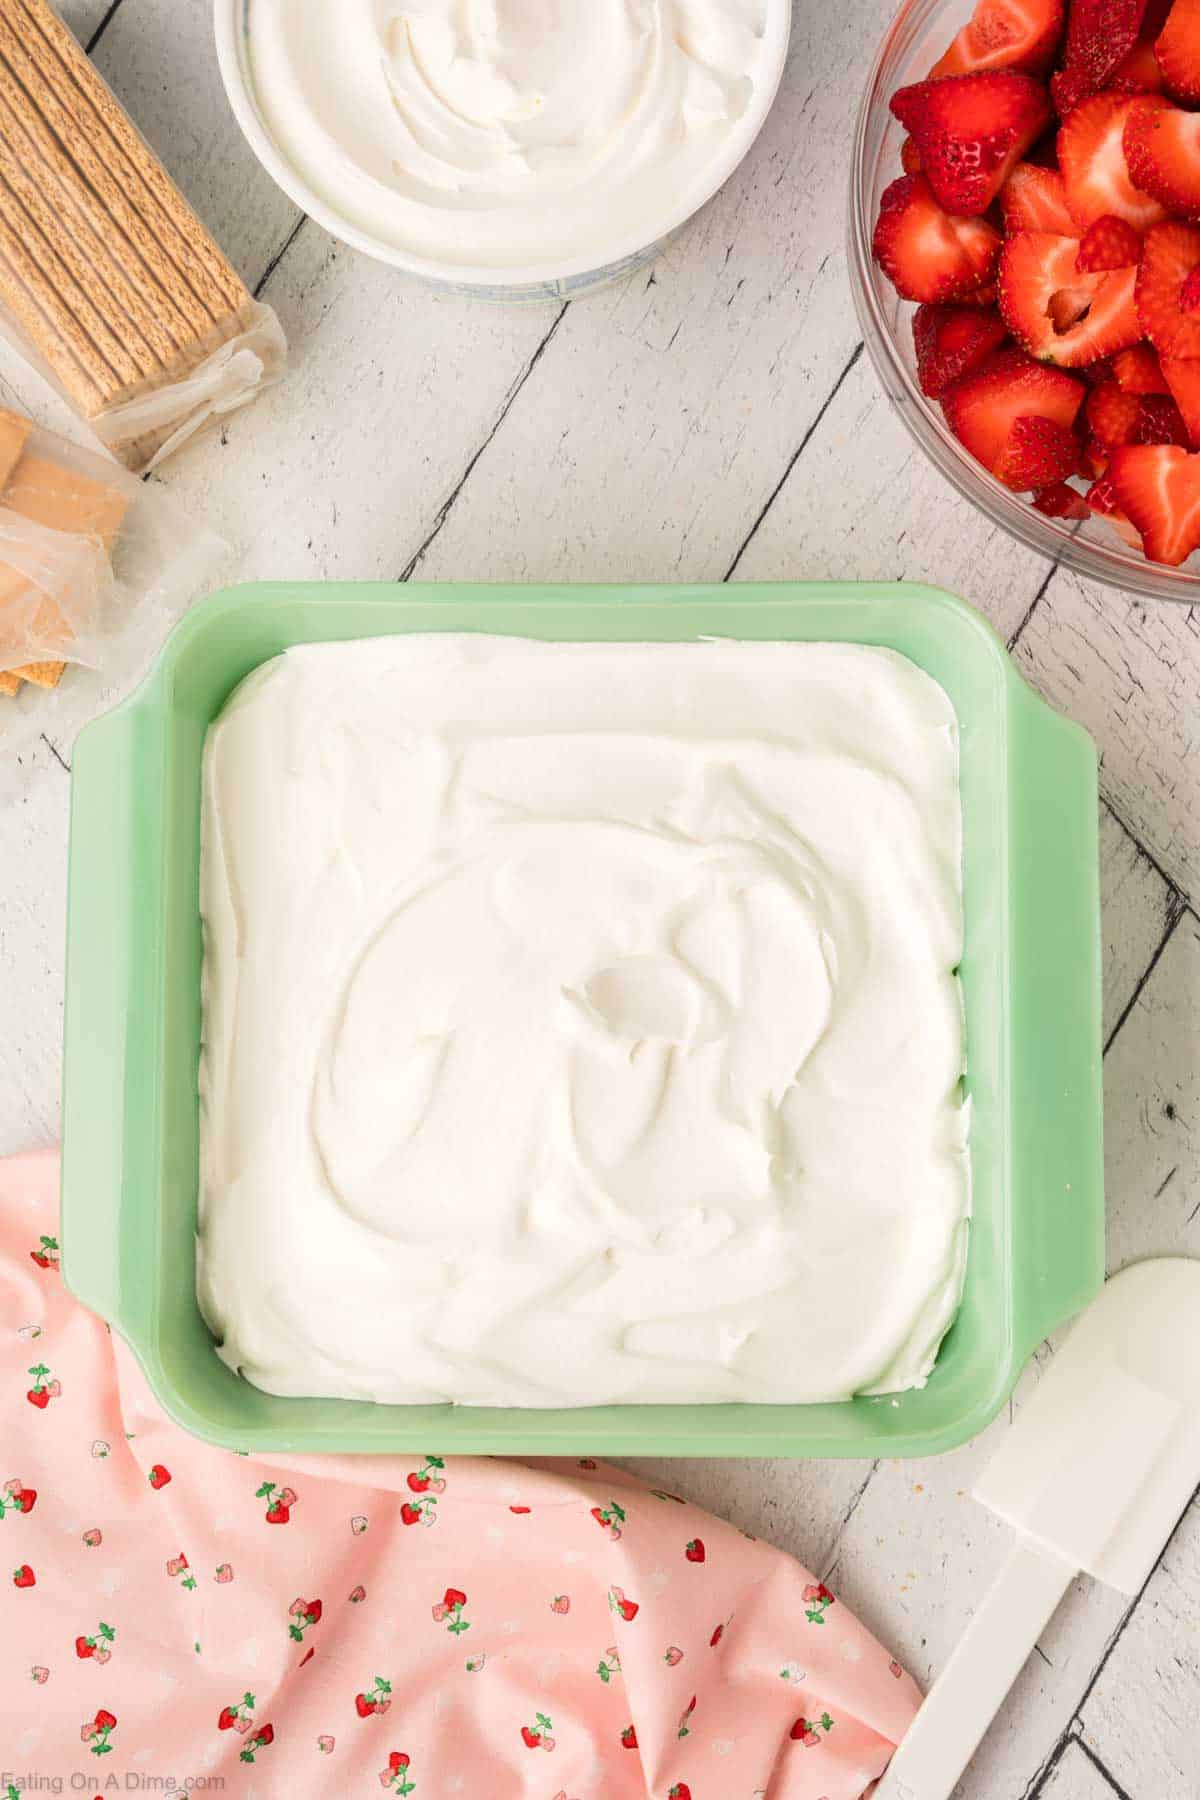 Spreading a layer of cool whip in the baking dish